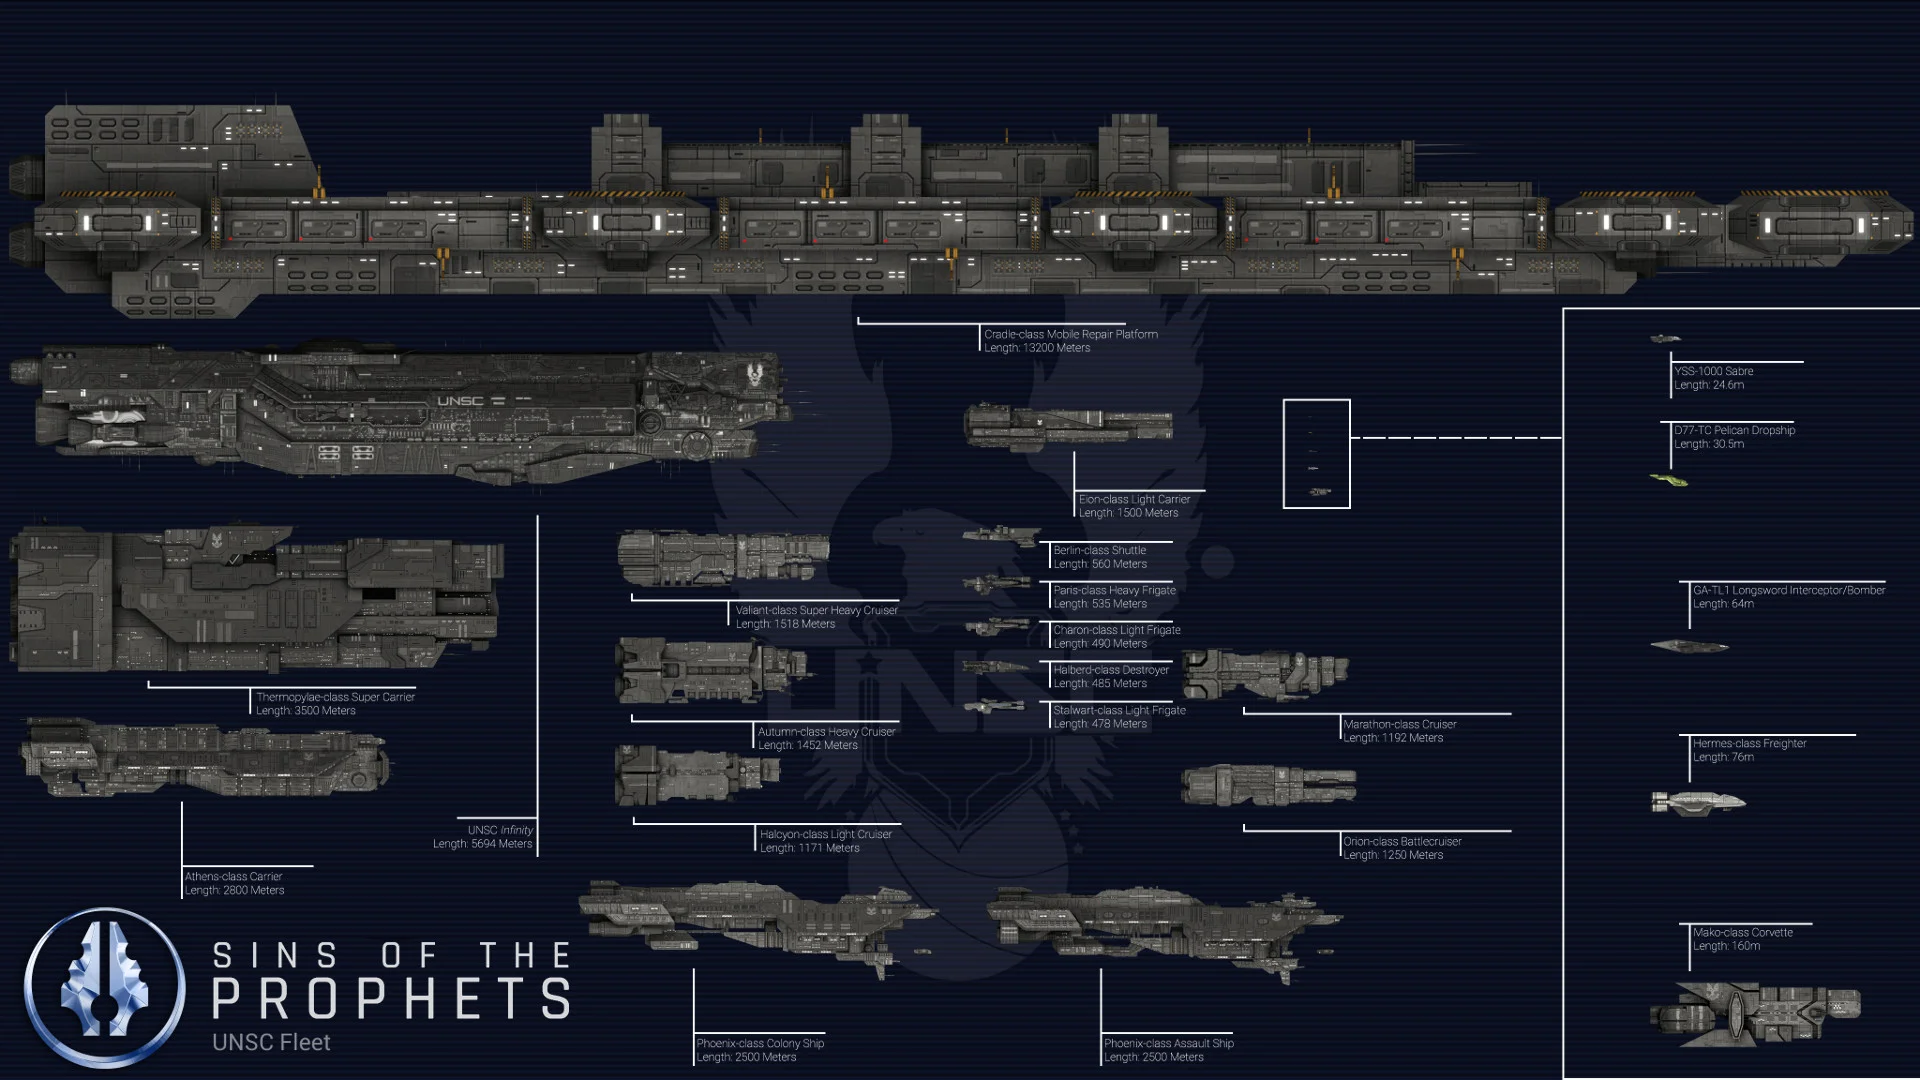 UNSC Fleet Scale image – Sins of the Prophets mod for Sins of a Solar Empire